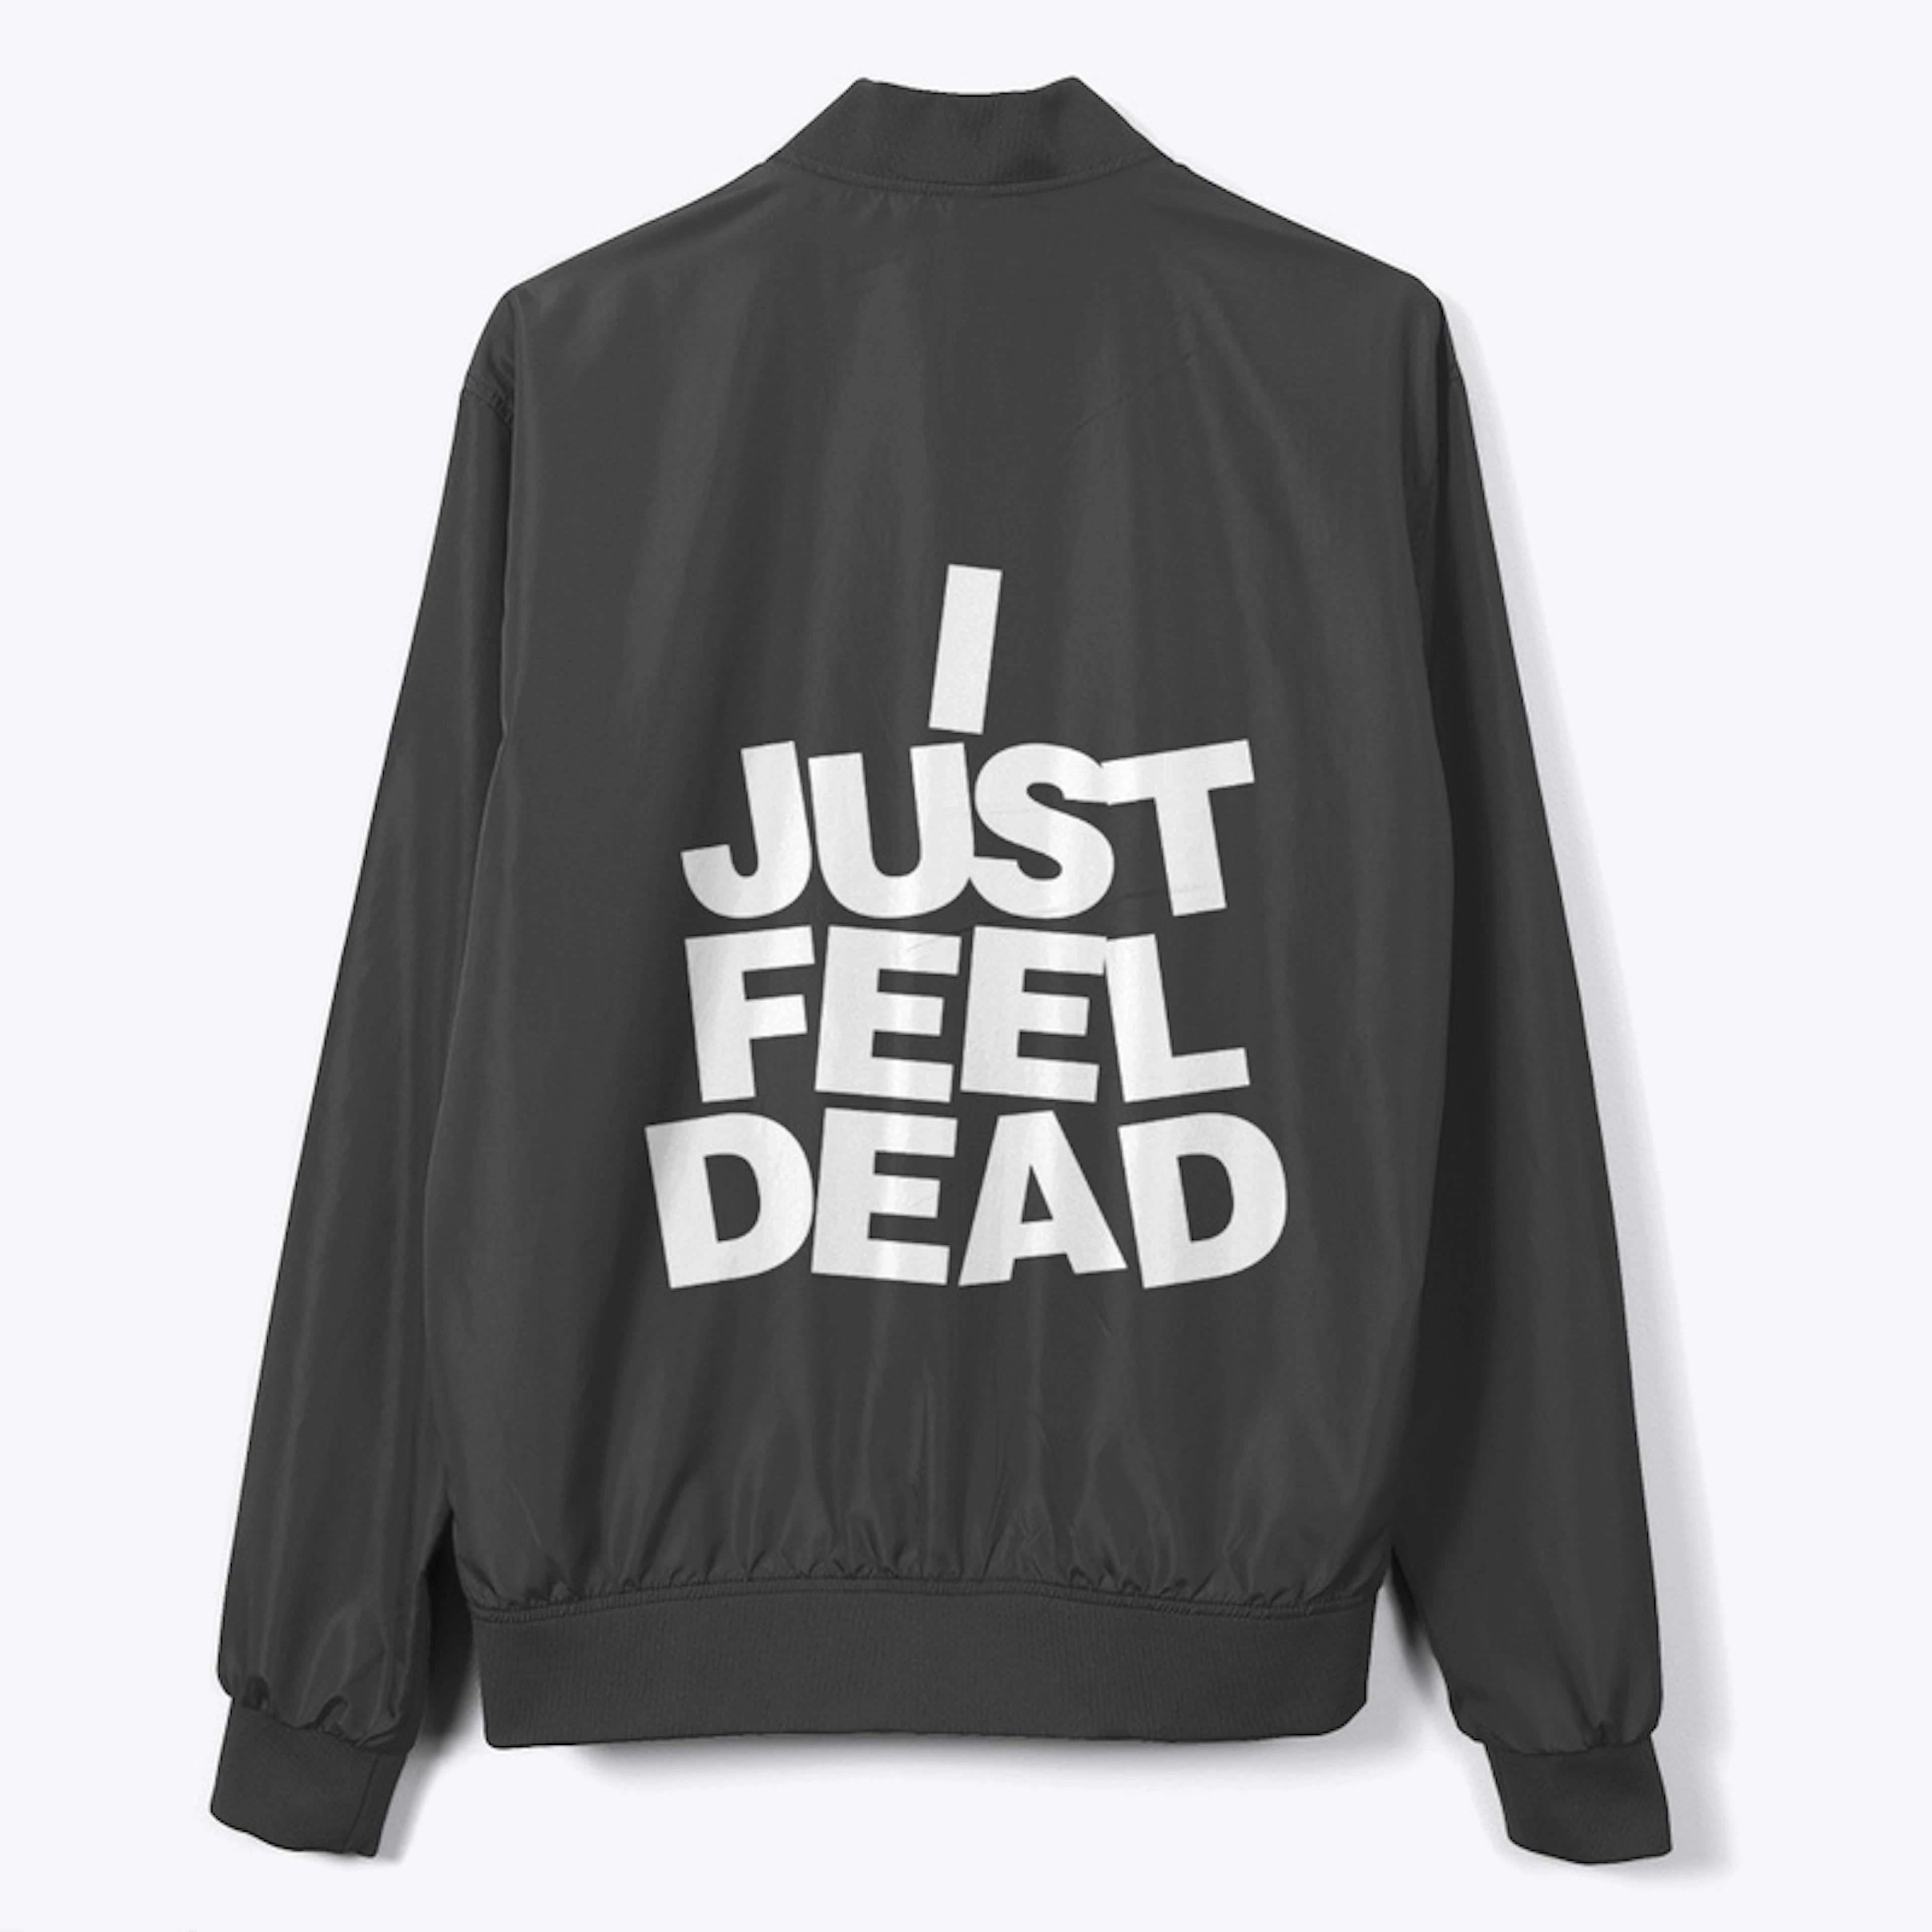 *ijusfeeldead* "outofplace" collection